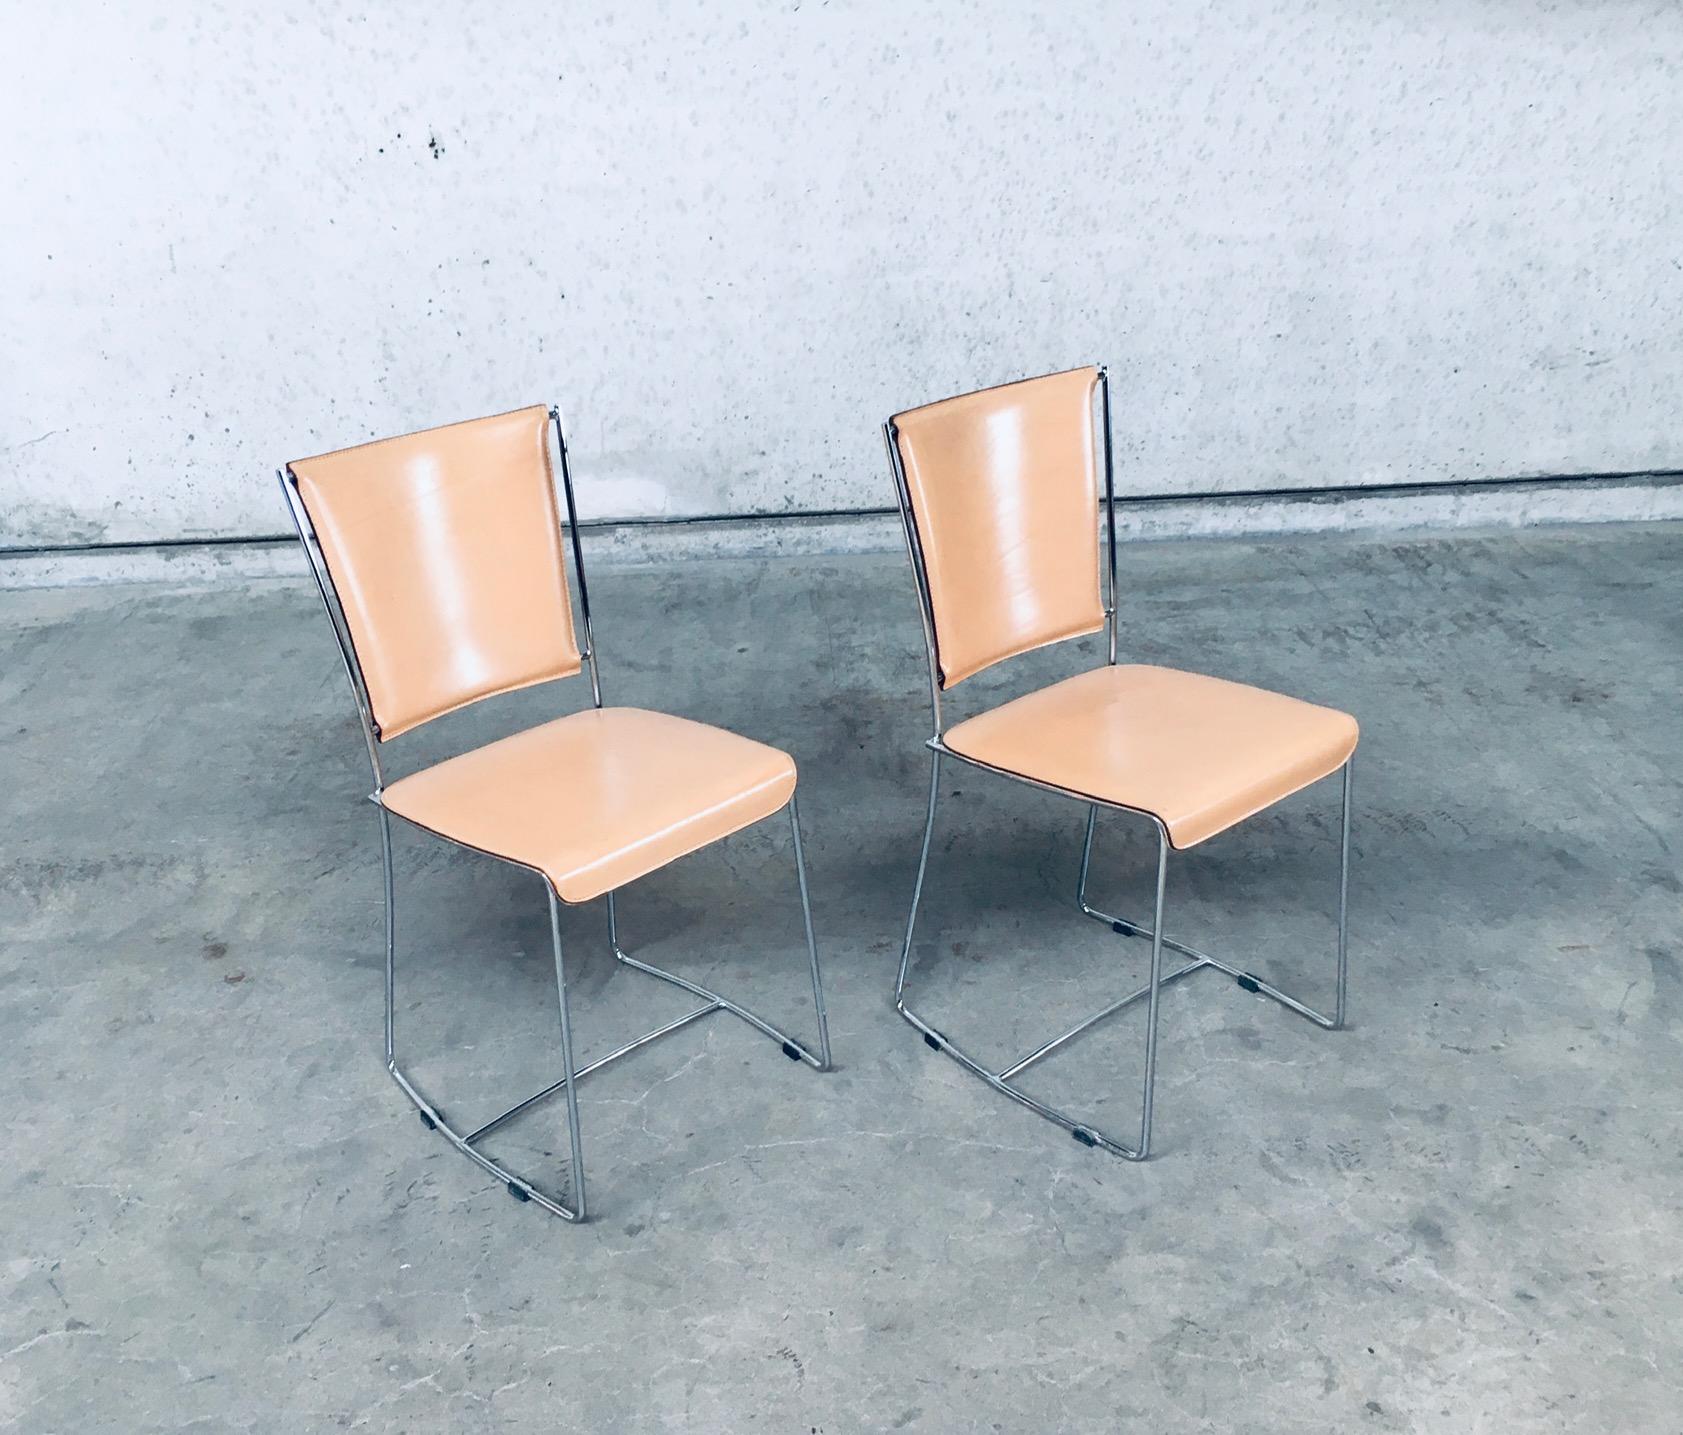 Post-Modern Postmodern Italian Design Leather Dining Chair set by Segis, Italy 1990's For Sale